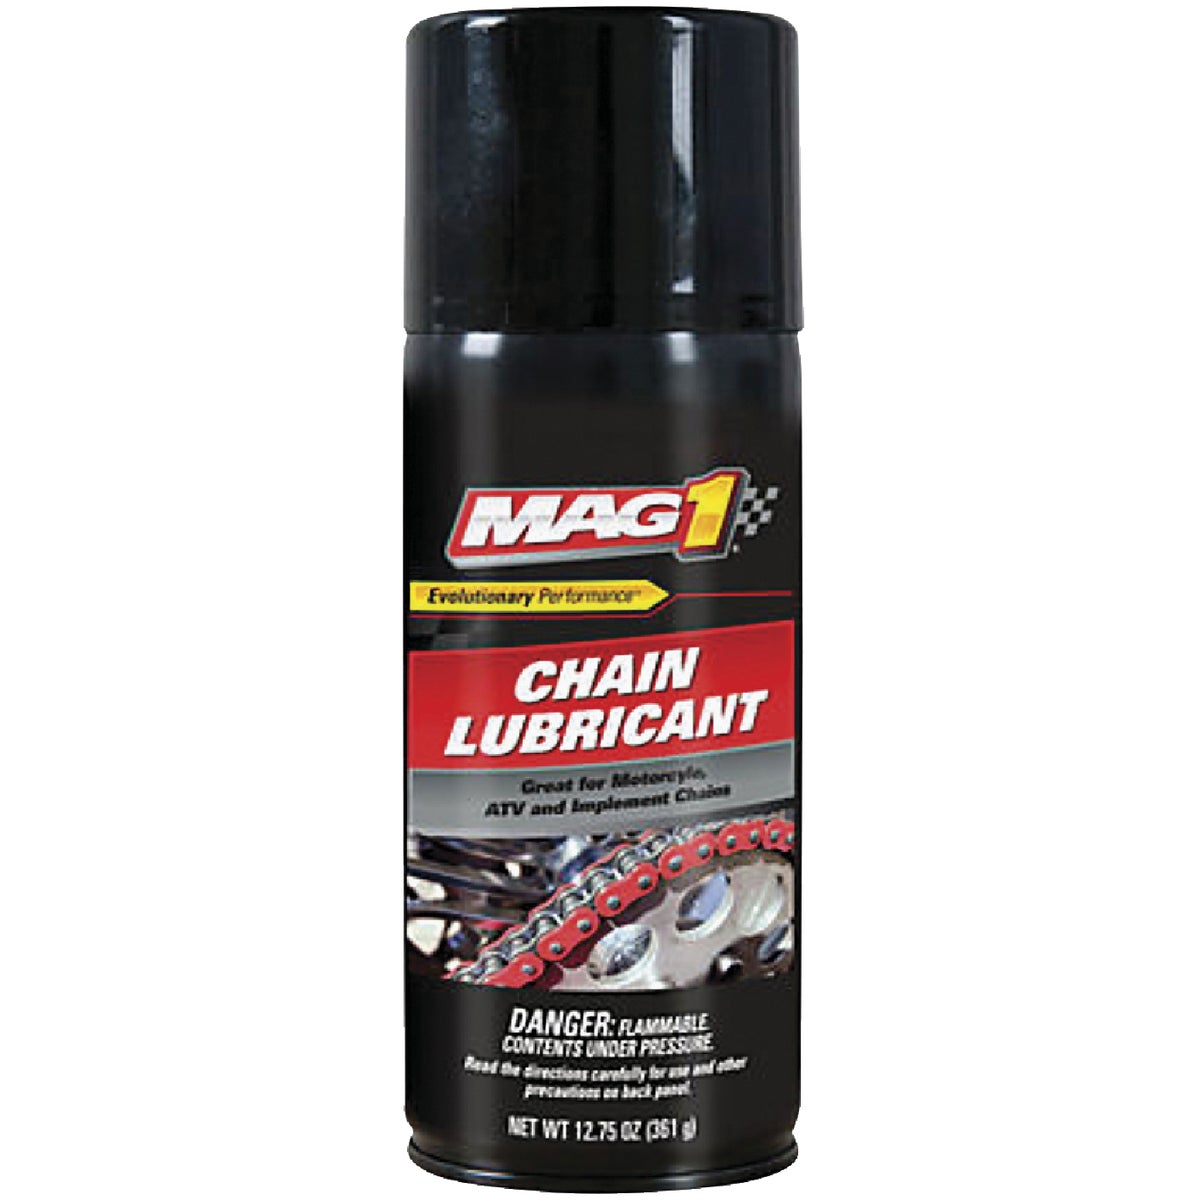 Item 574368, Mag 1, 14 ounces, extreme pressure chain lube, specially formulated to 